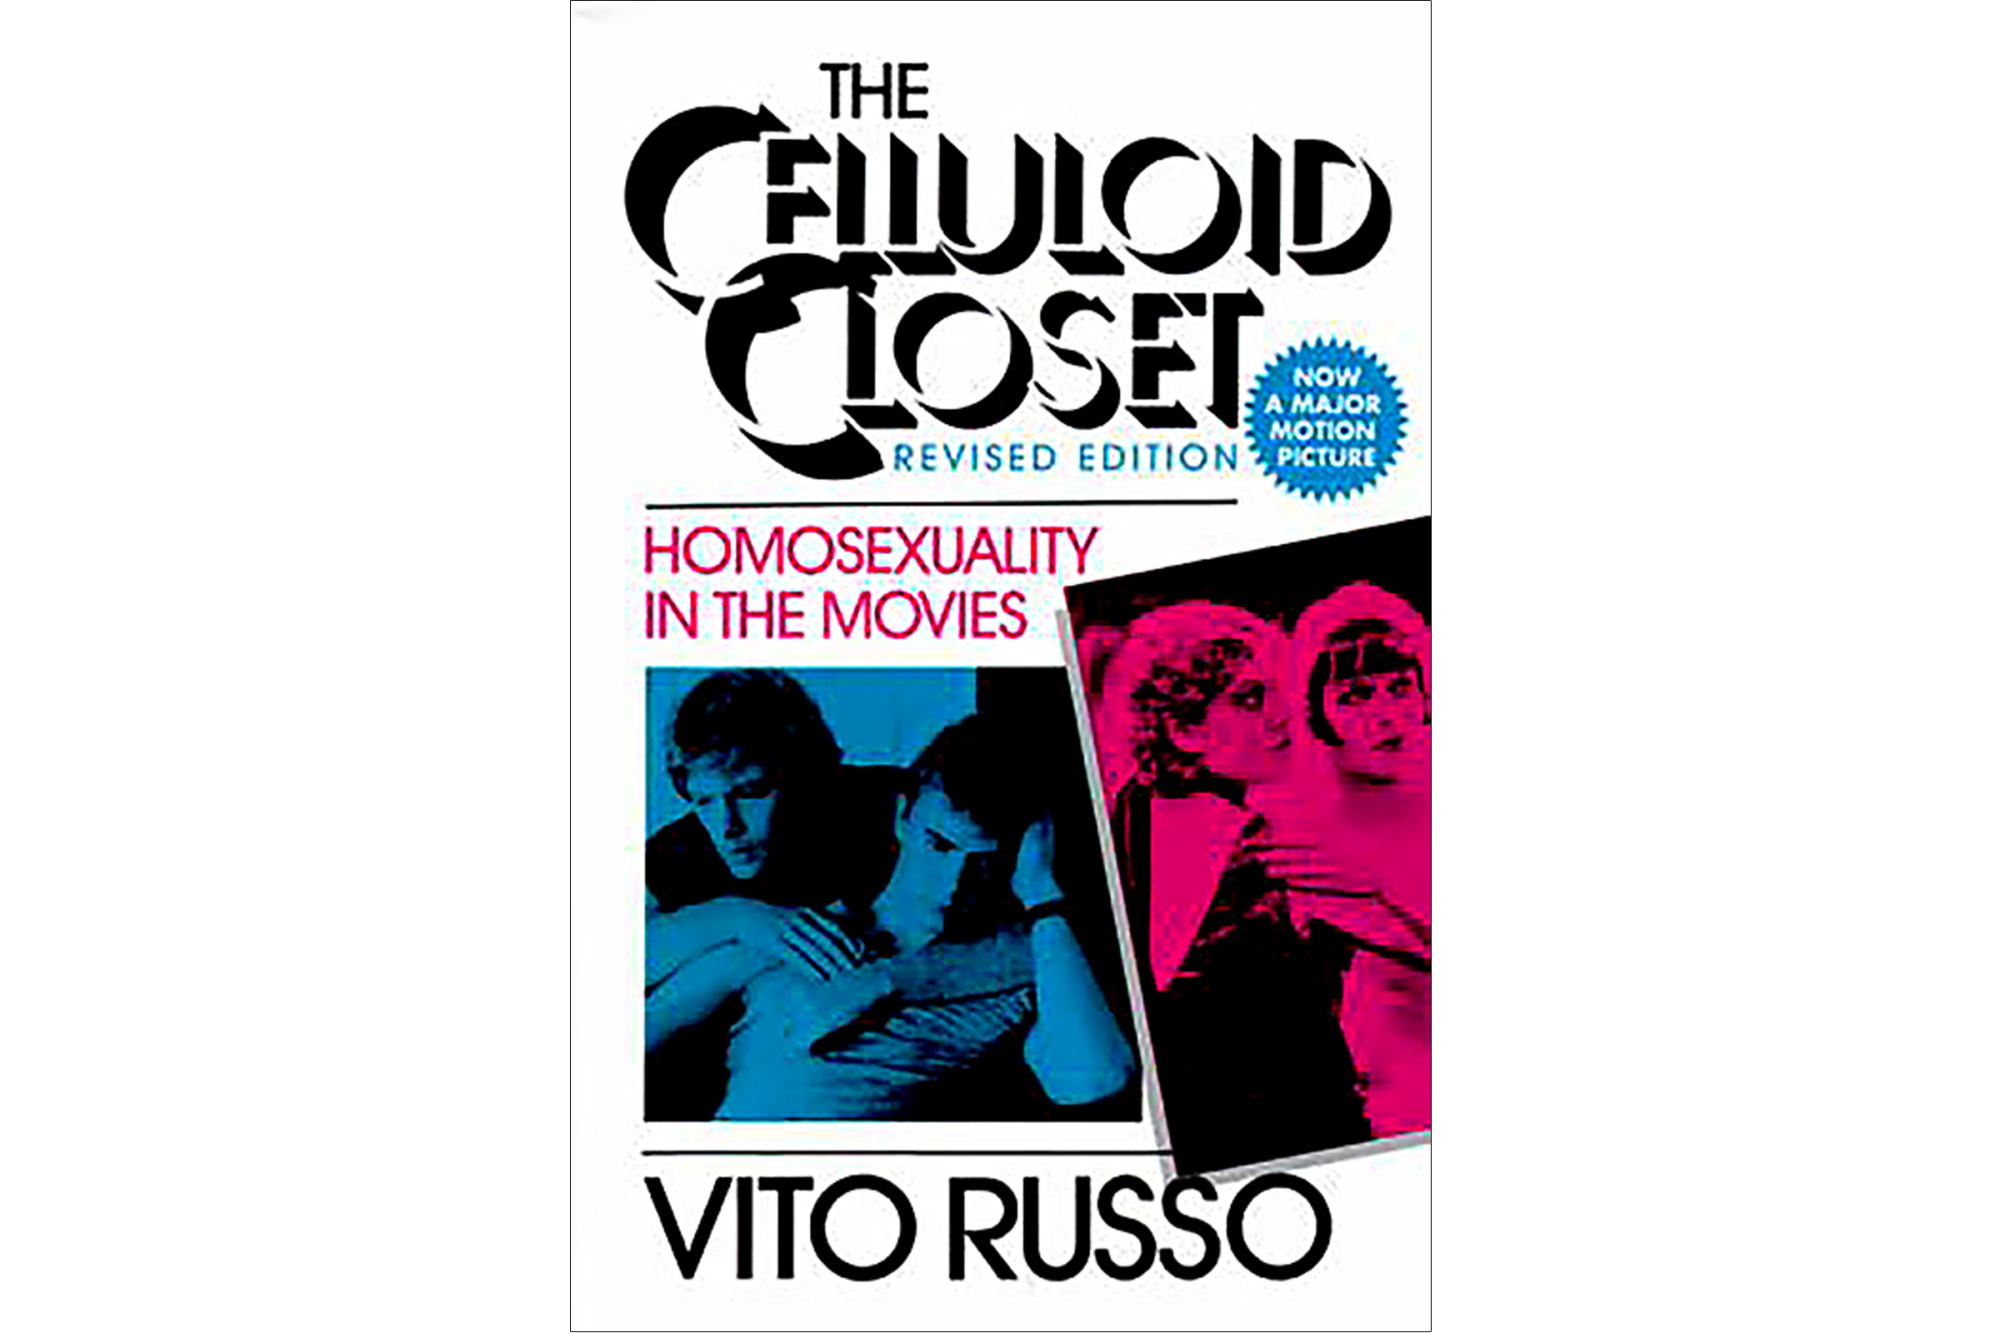 "The Celluloid Closet : Homosexuality in the Movies" by Vito Russo